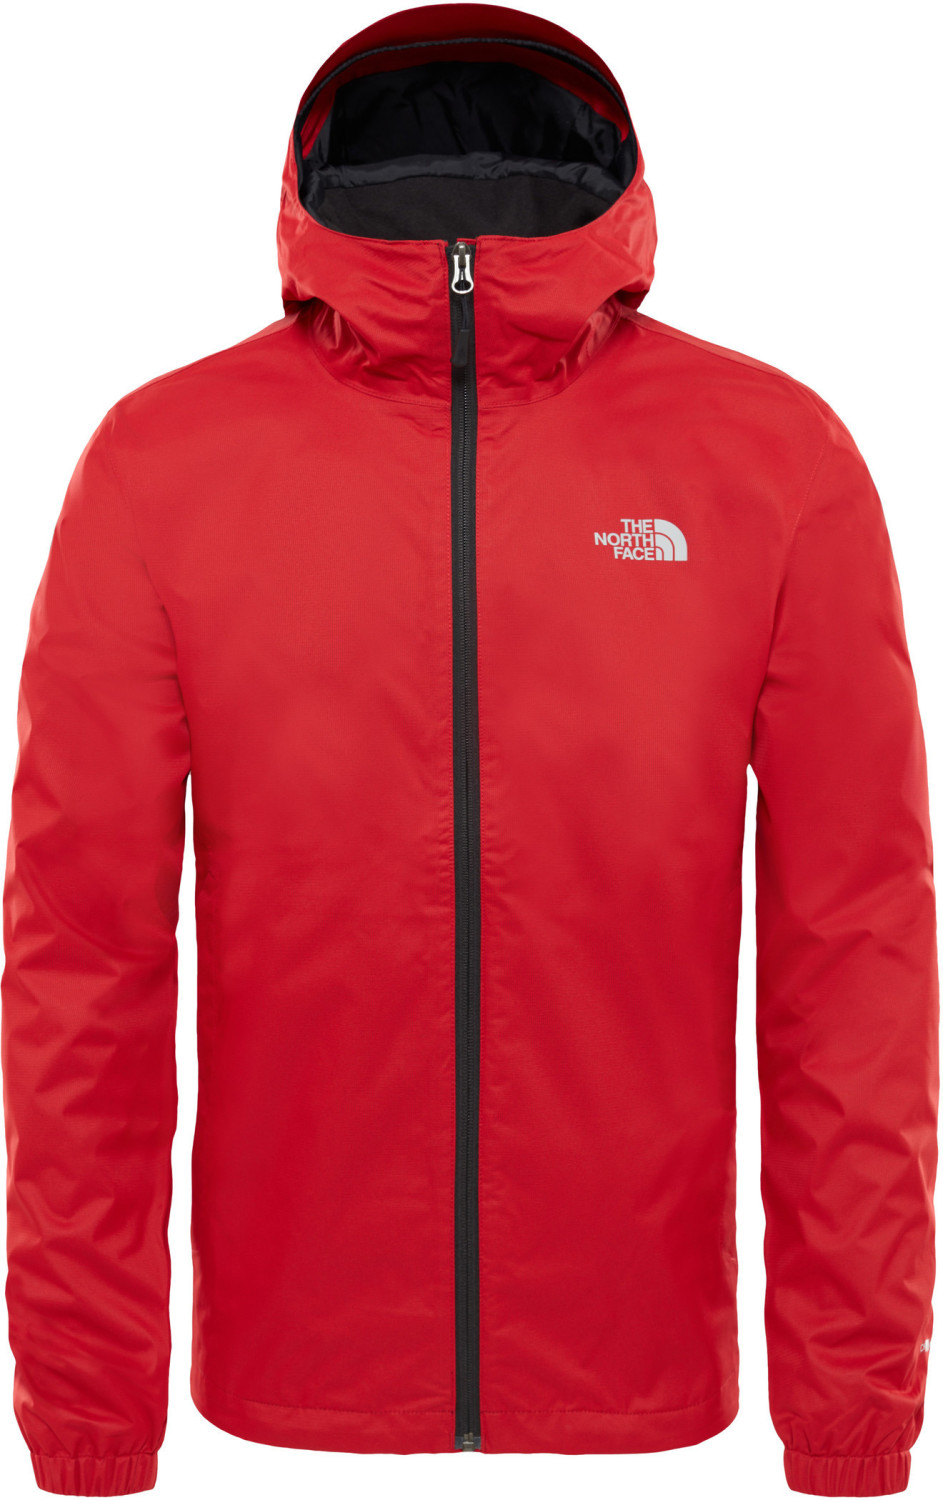 Buy The North Face Men's Quest Jacket rage red/black heather from £63.